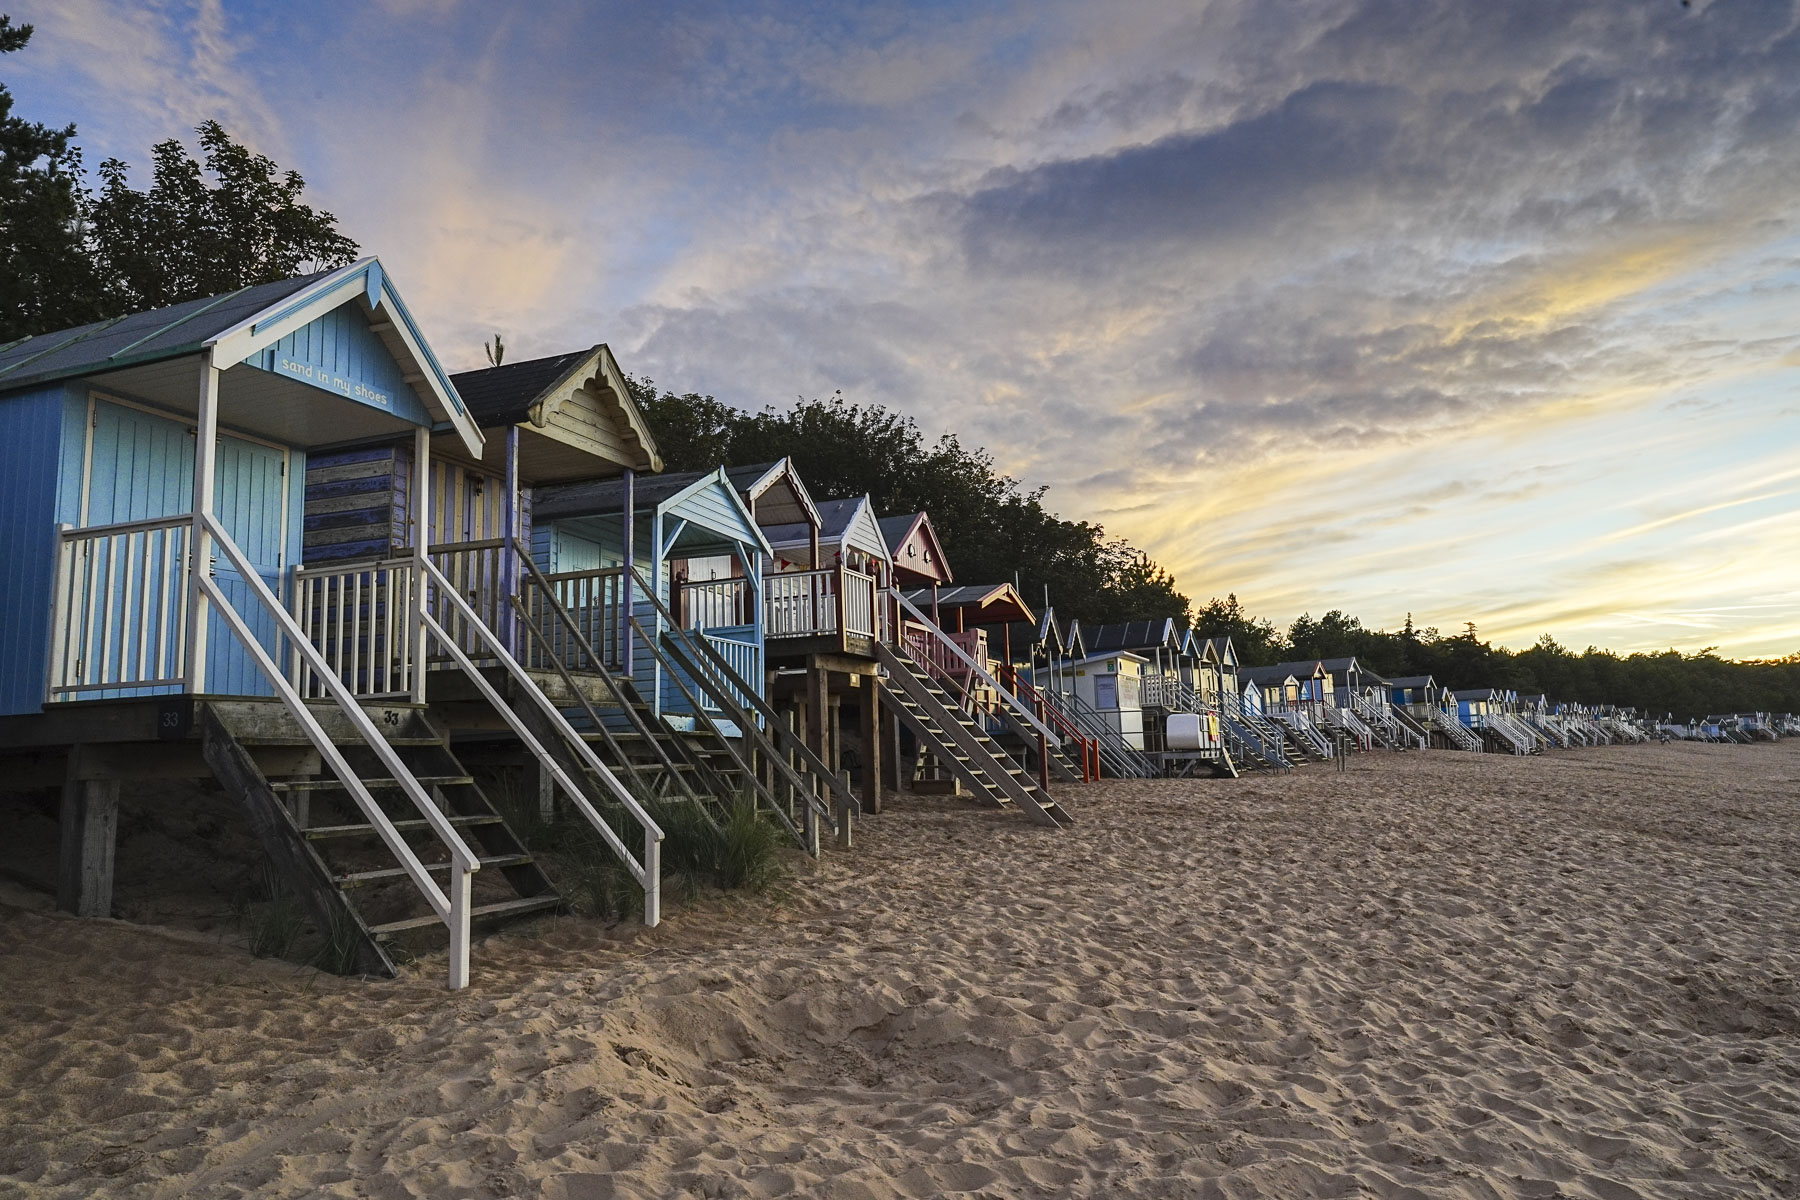 Beach huts on a sandy beach at golden hour captured with the Sony A7C II full-frame mirrorless camera